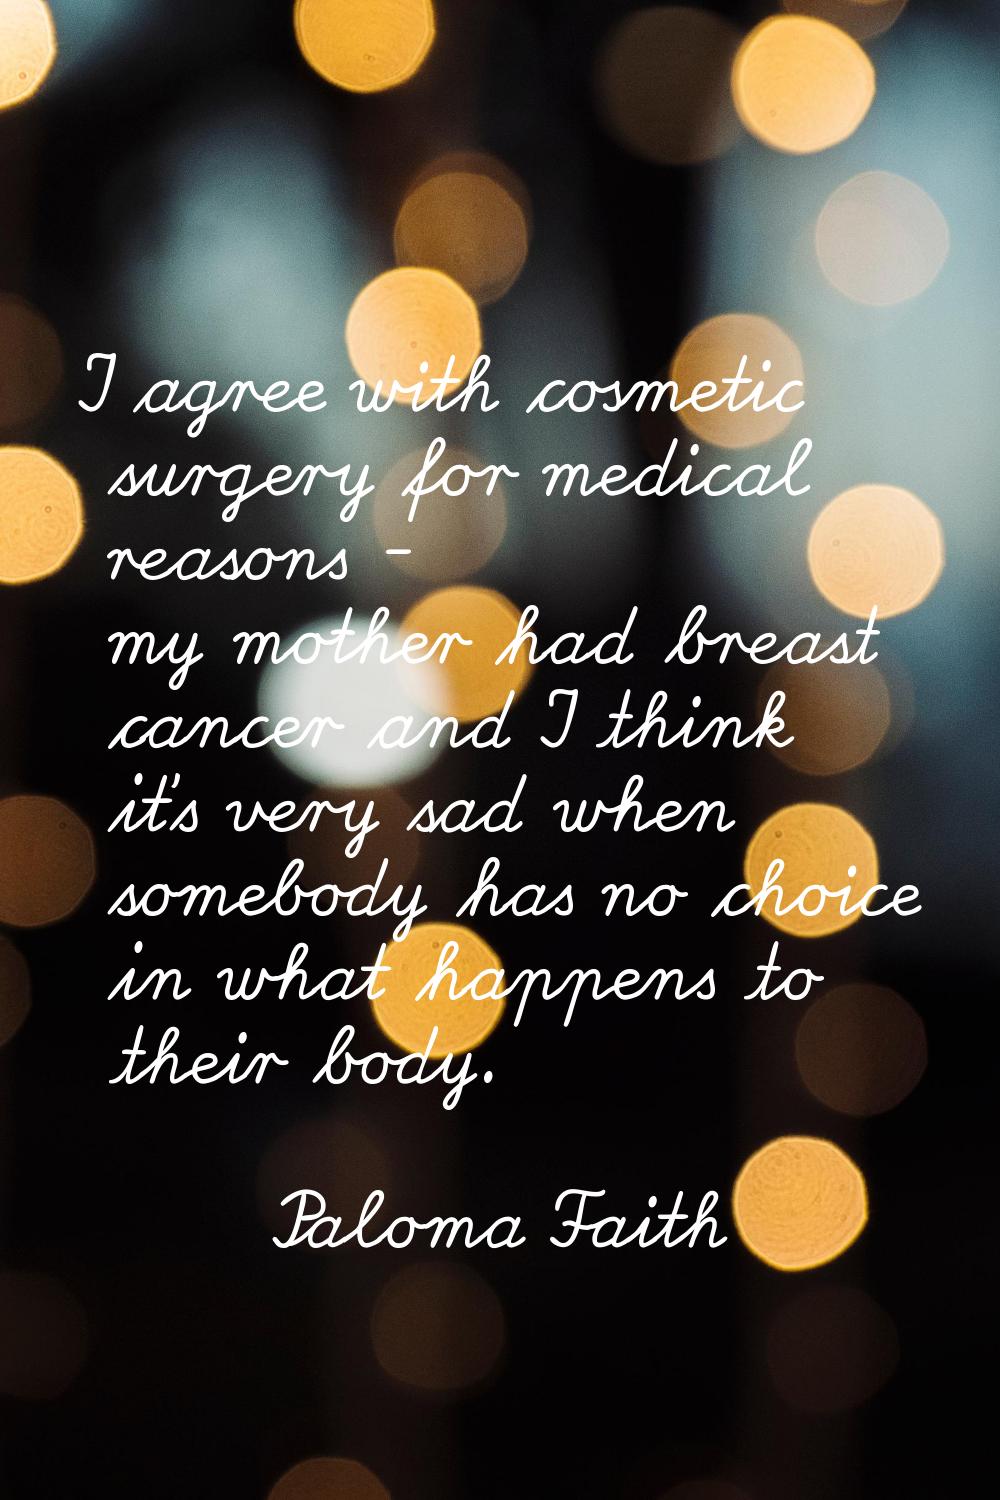 I agree with cosmetic surgery for medical reasons - my mother had breast cancer and I think it's ve